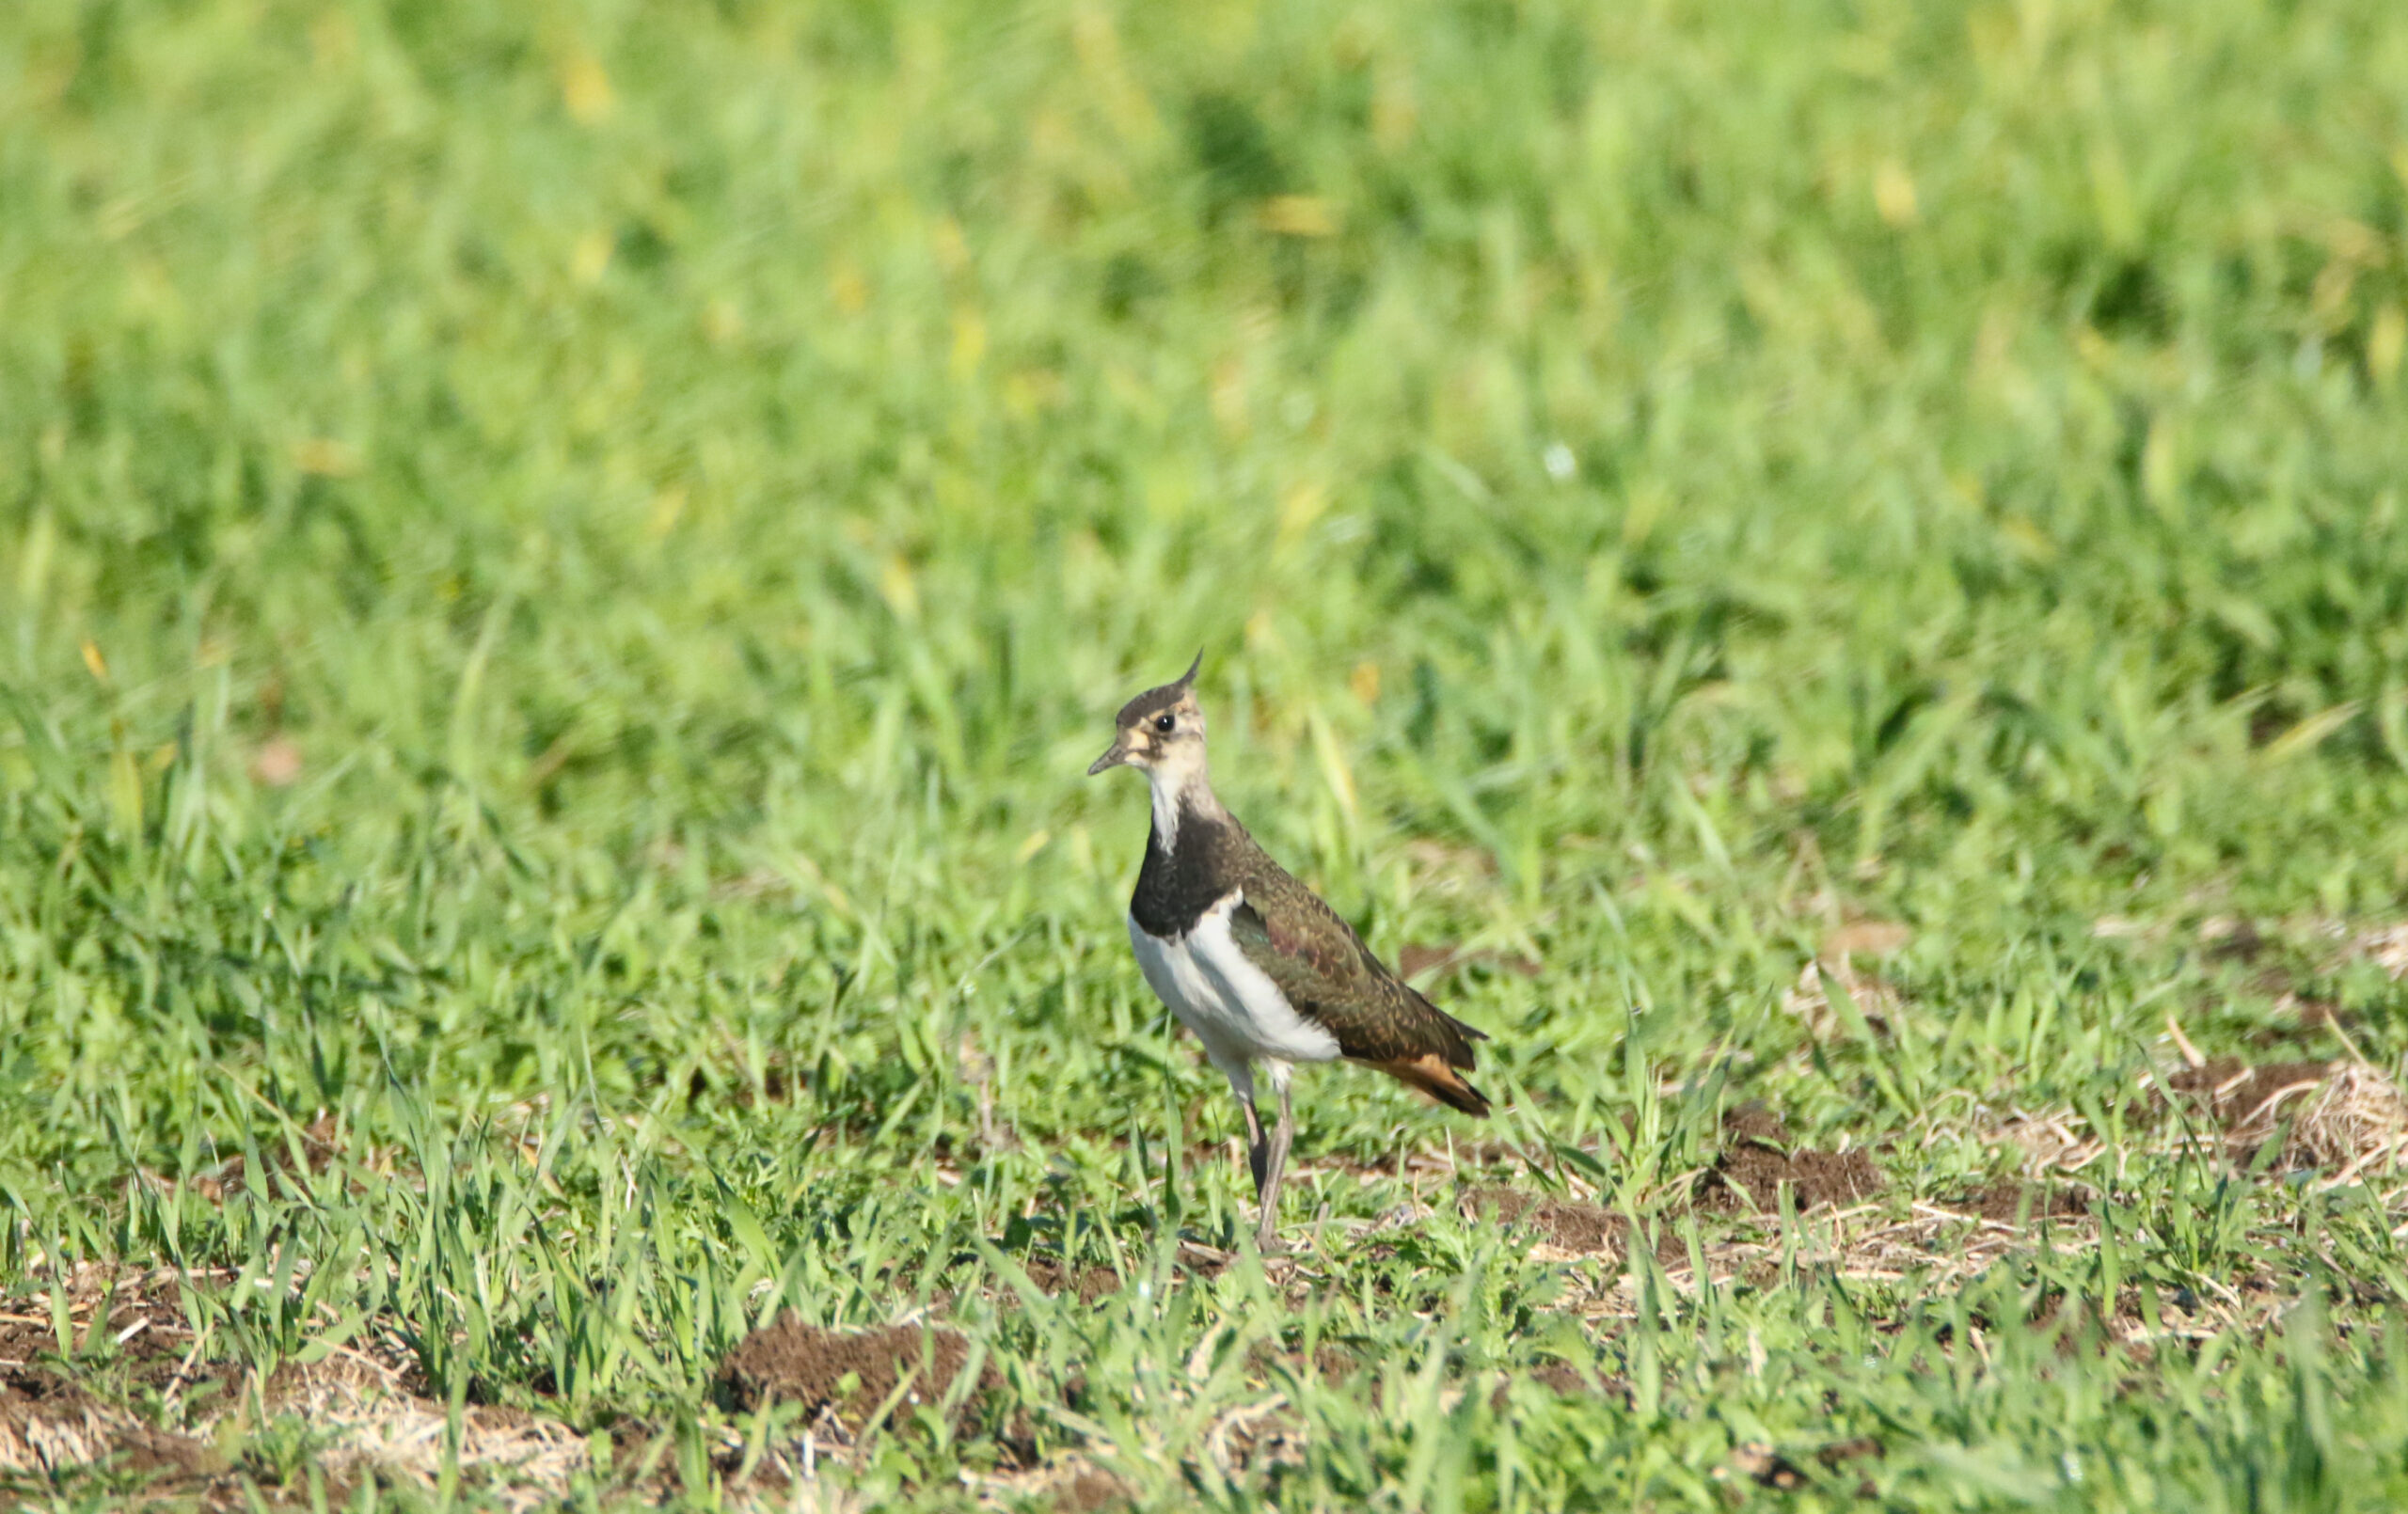 Lapwing fledgling in the spring barley